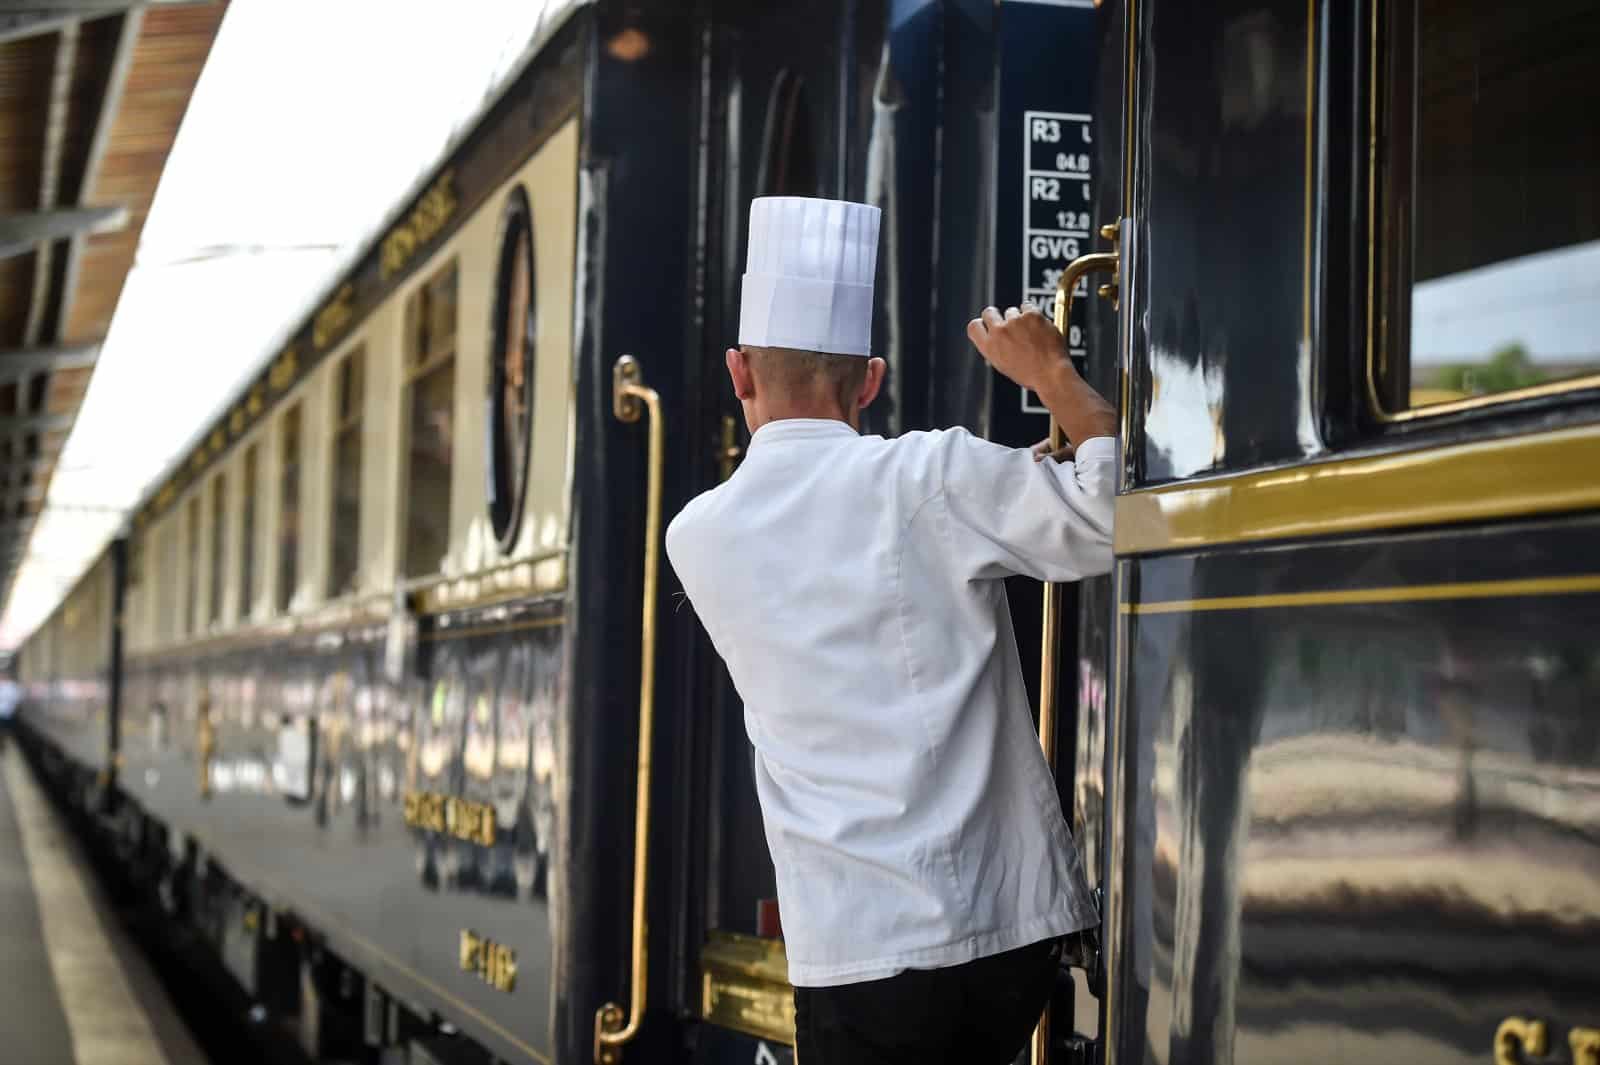 <p class="wp-caption-text">Image Credit: Shutterstock / roibu</p>  <p>In June 2024, for the first time in its storied existence, the Venice Simplon-Orient-Express will extend its route from Paris, France, to Portofino, Italy, offering passengers a unique two-day voyage priced at $8,500 for a one-way ticket.</p>